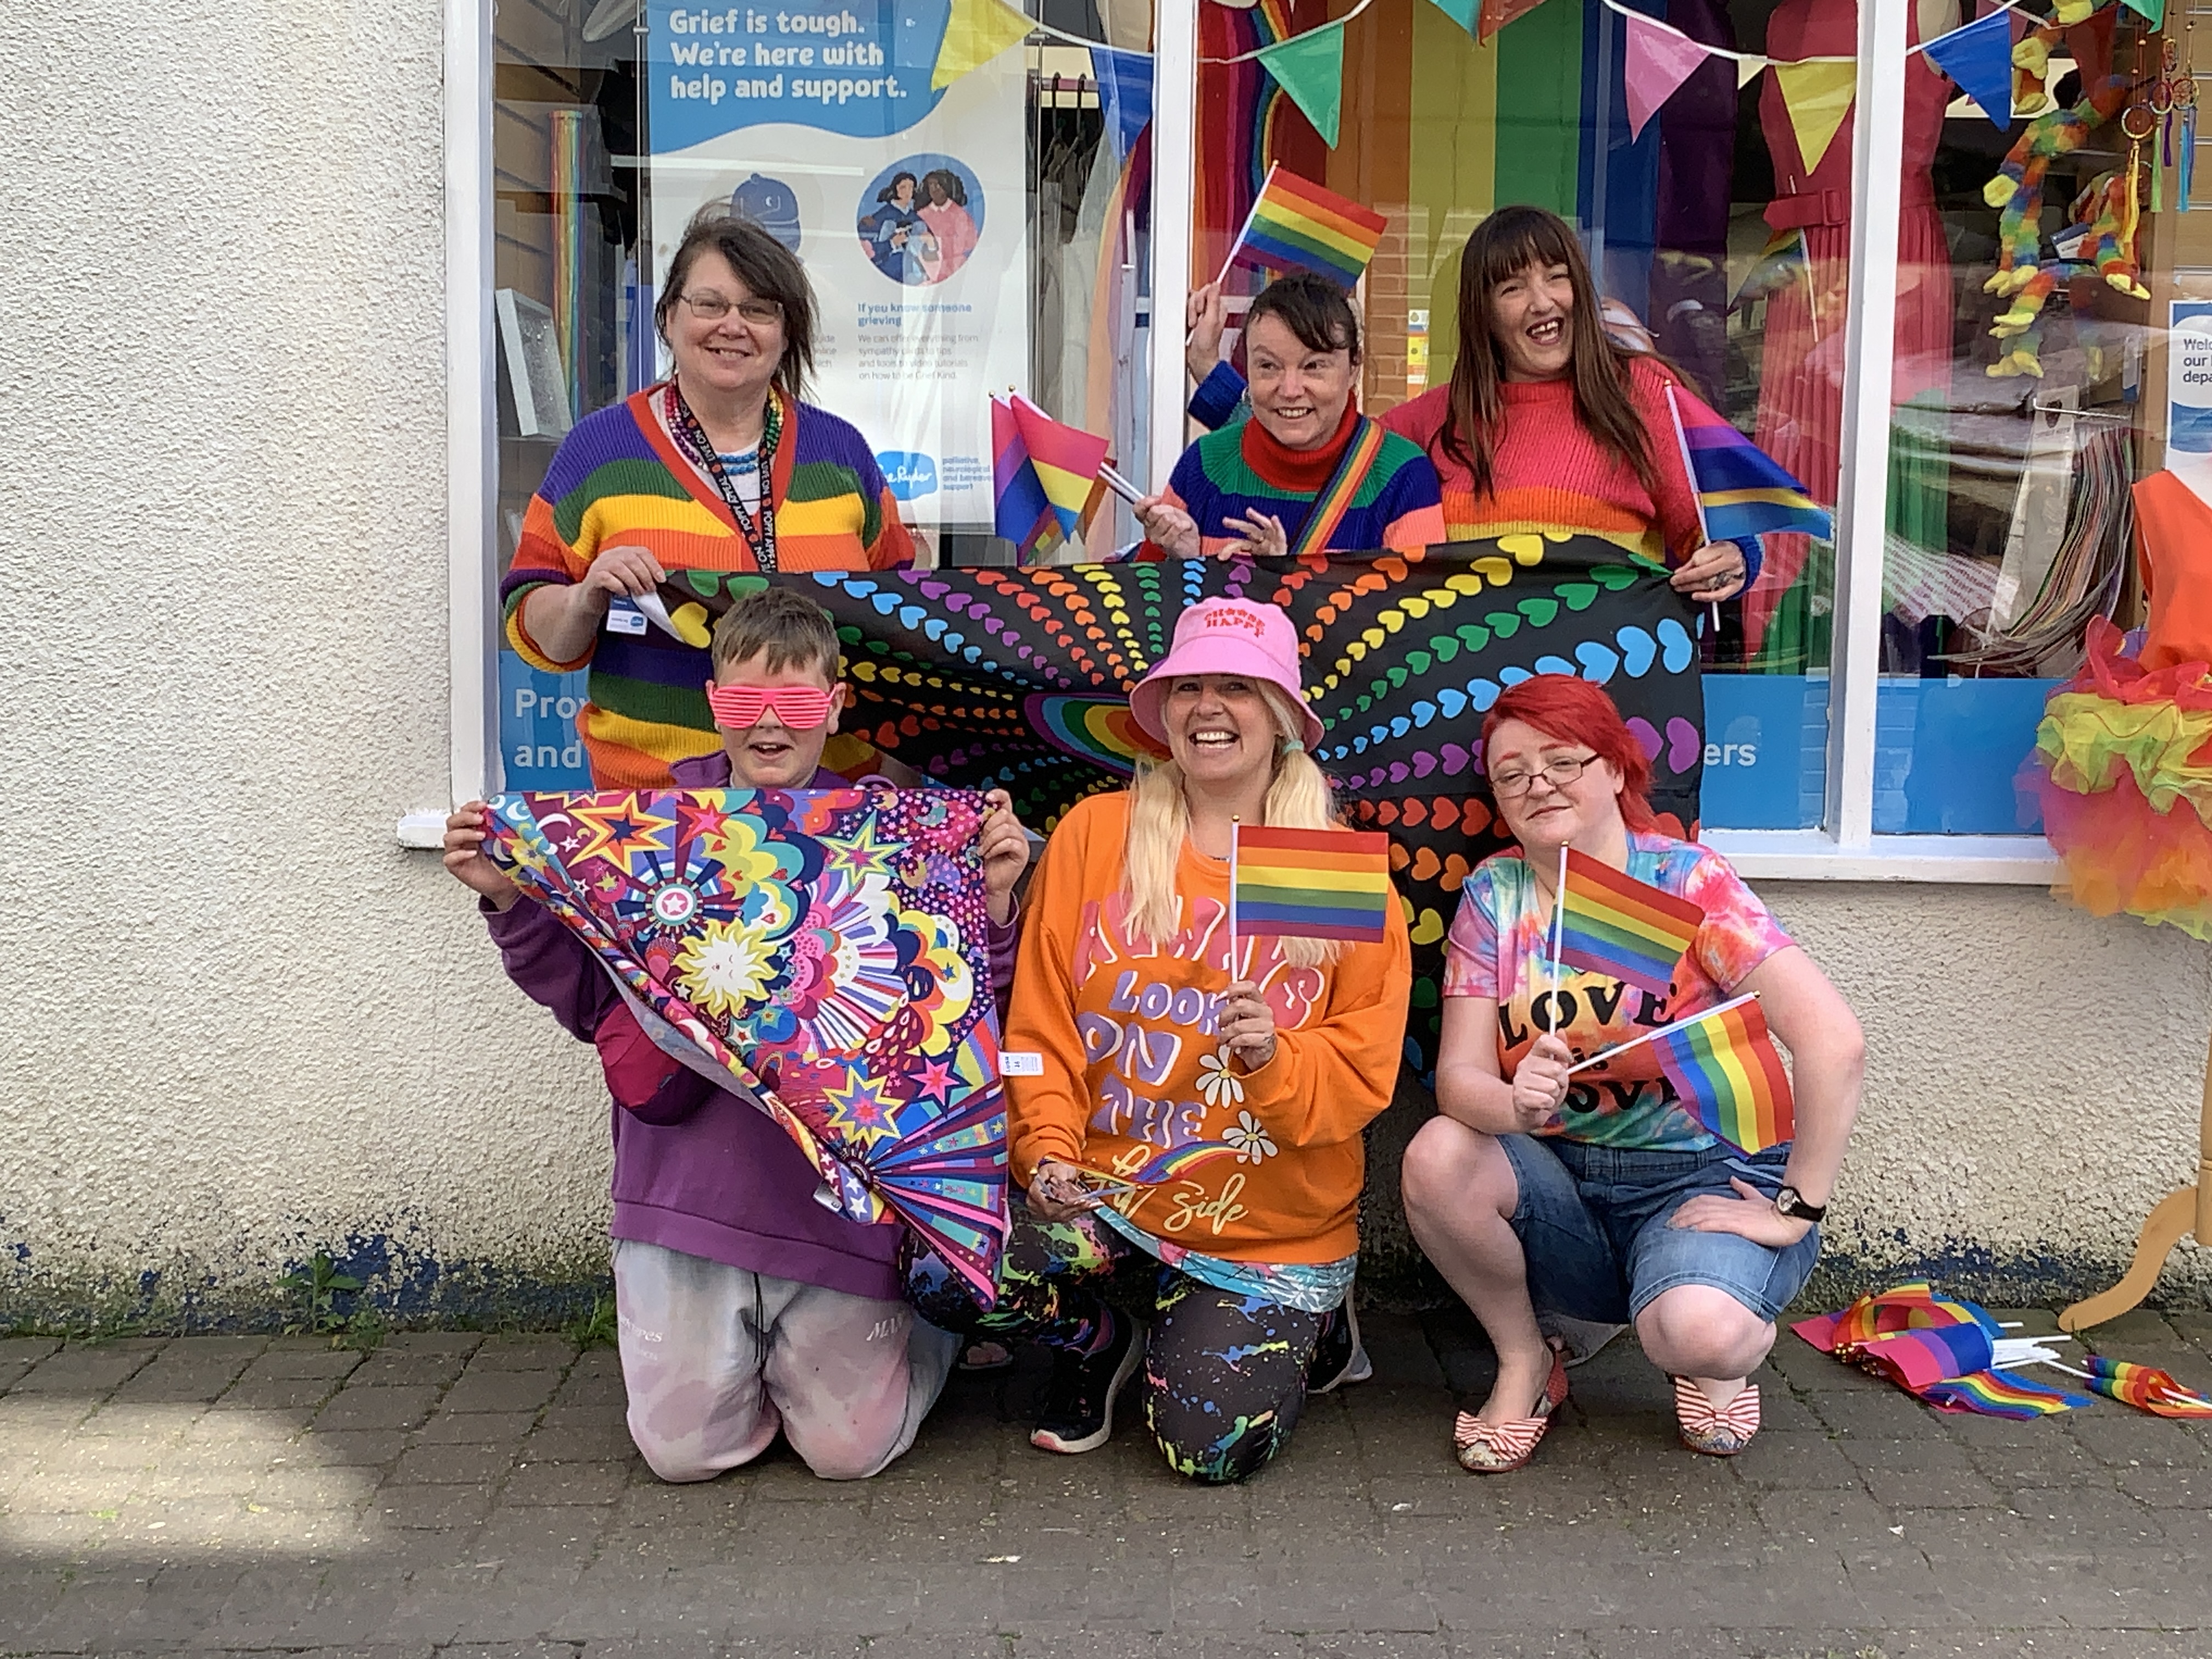 Staff and Customers of Shepton Mallet Sue Ryder Shop, wear rainbow clothes and fly Pride flags